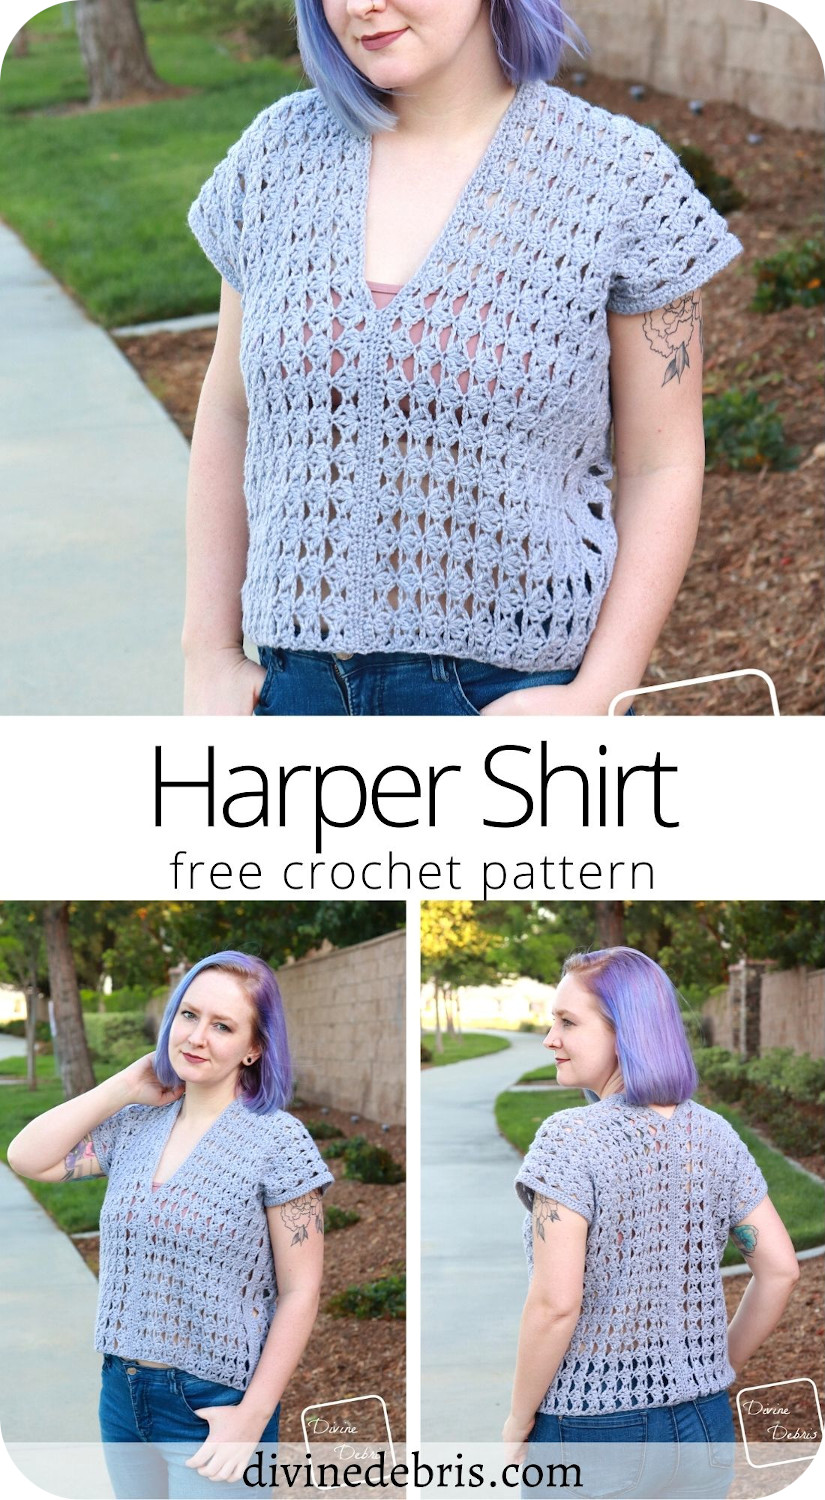 Learn to make the Harper Shirt, a fun, simple, and quick summer layering top, from a free crochet pattern on DivineDebris.com